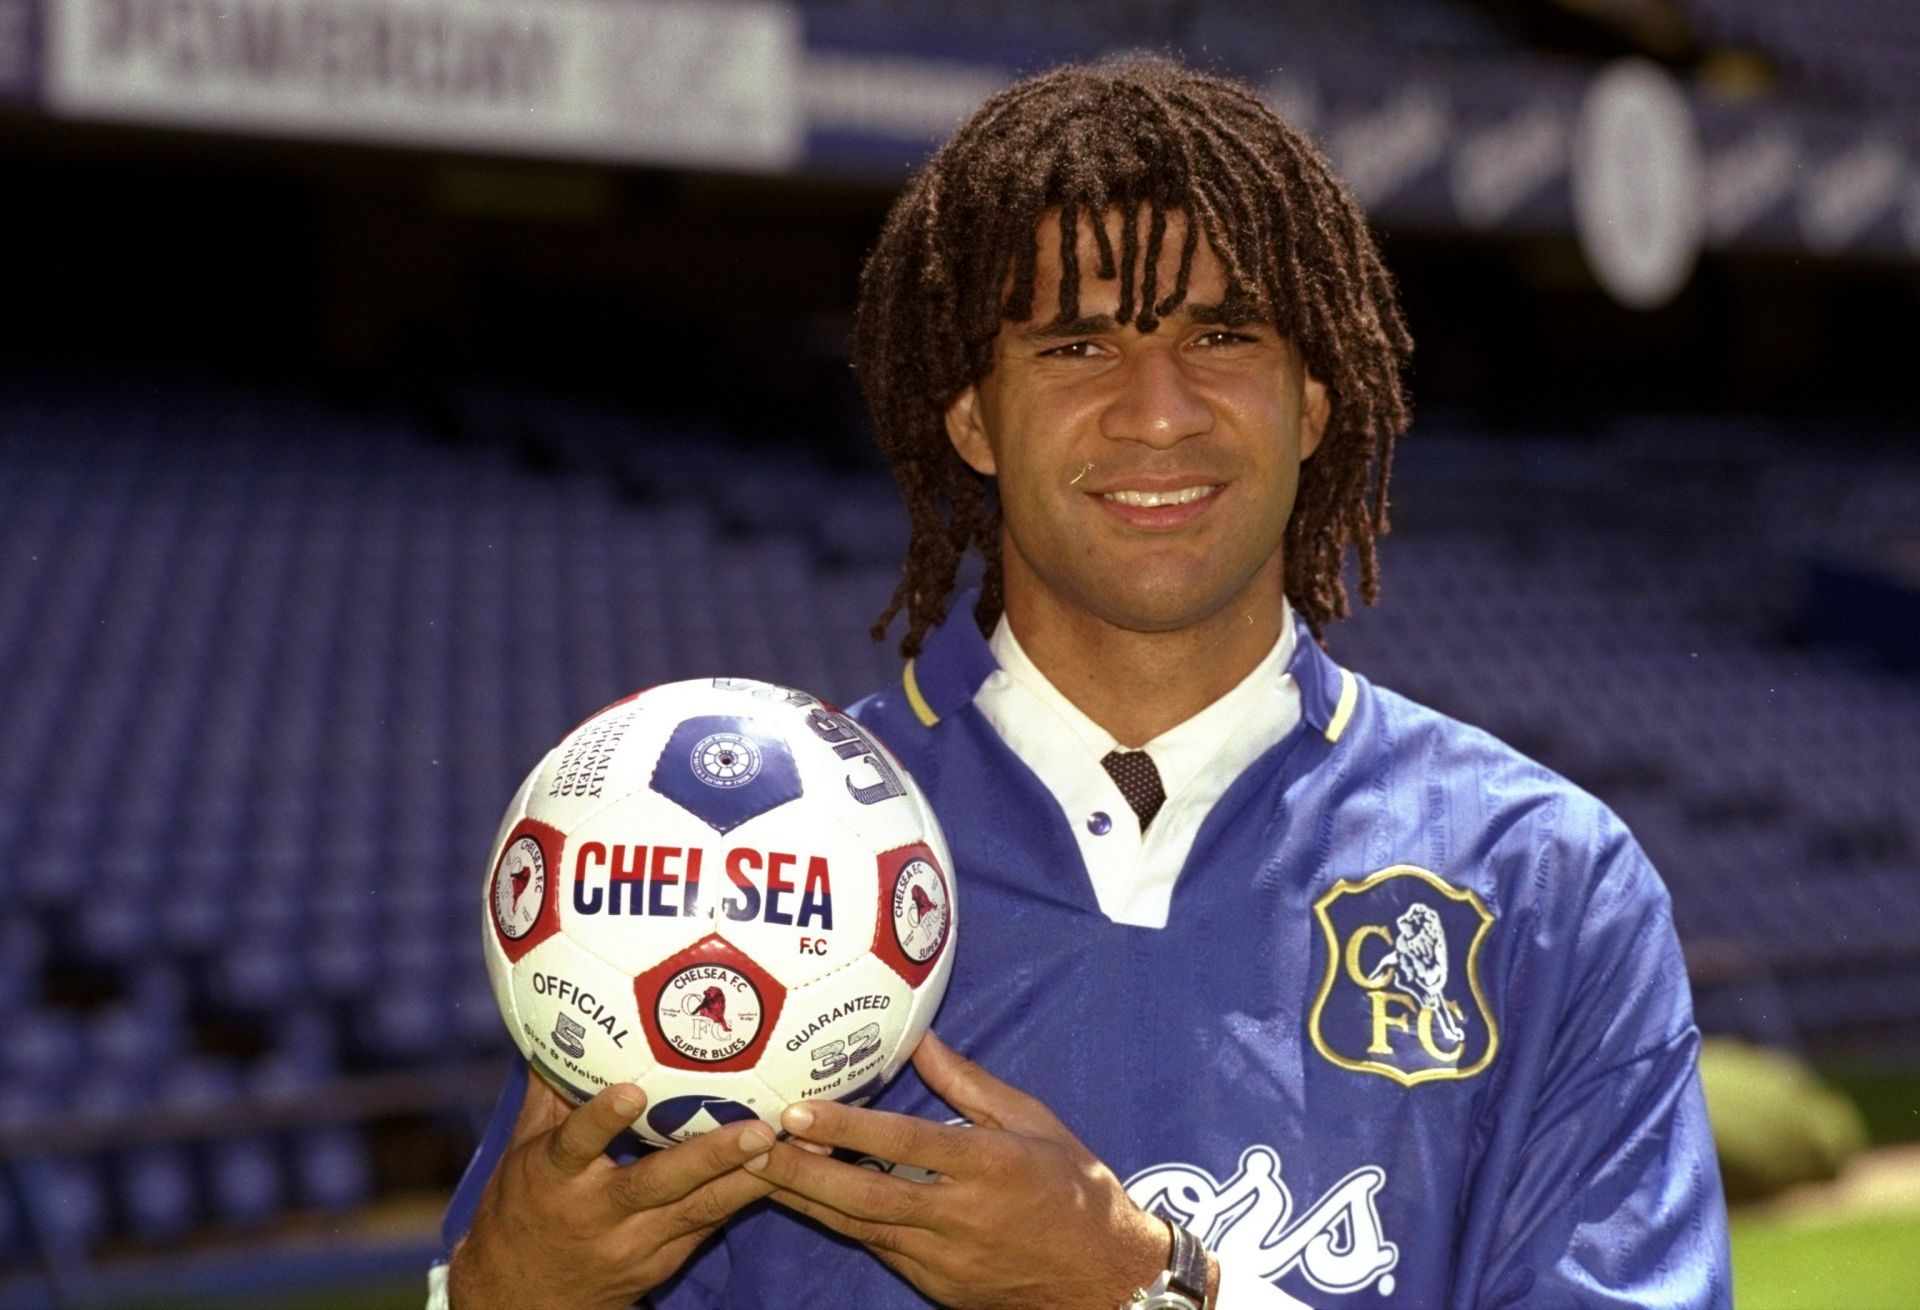 Ruud Gullit at his unveiling as a new Chelsea player